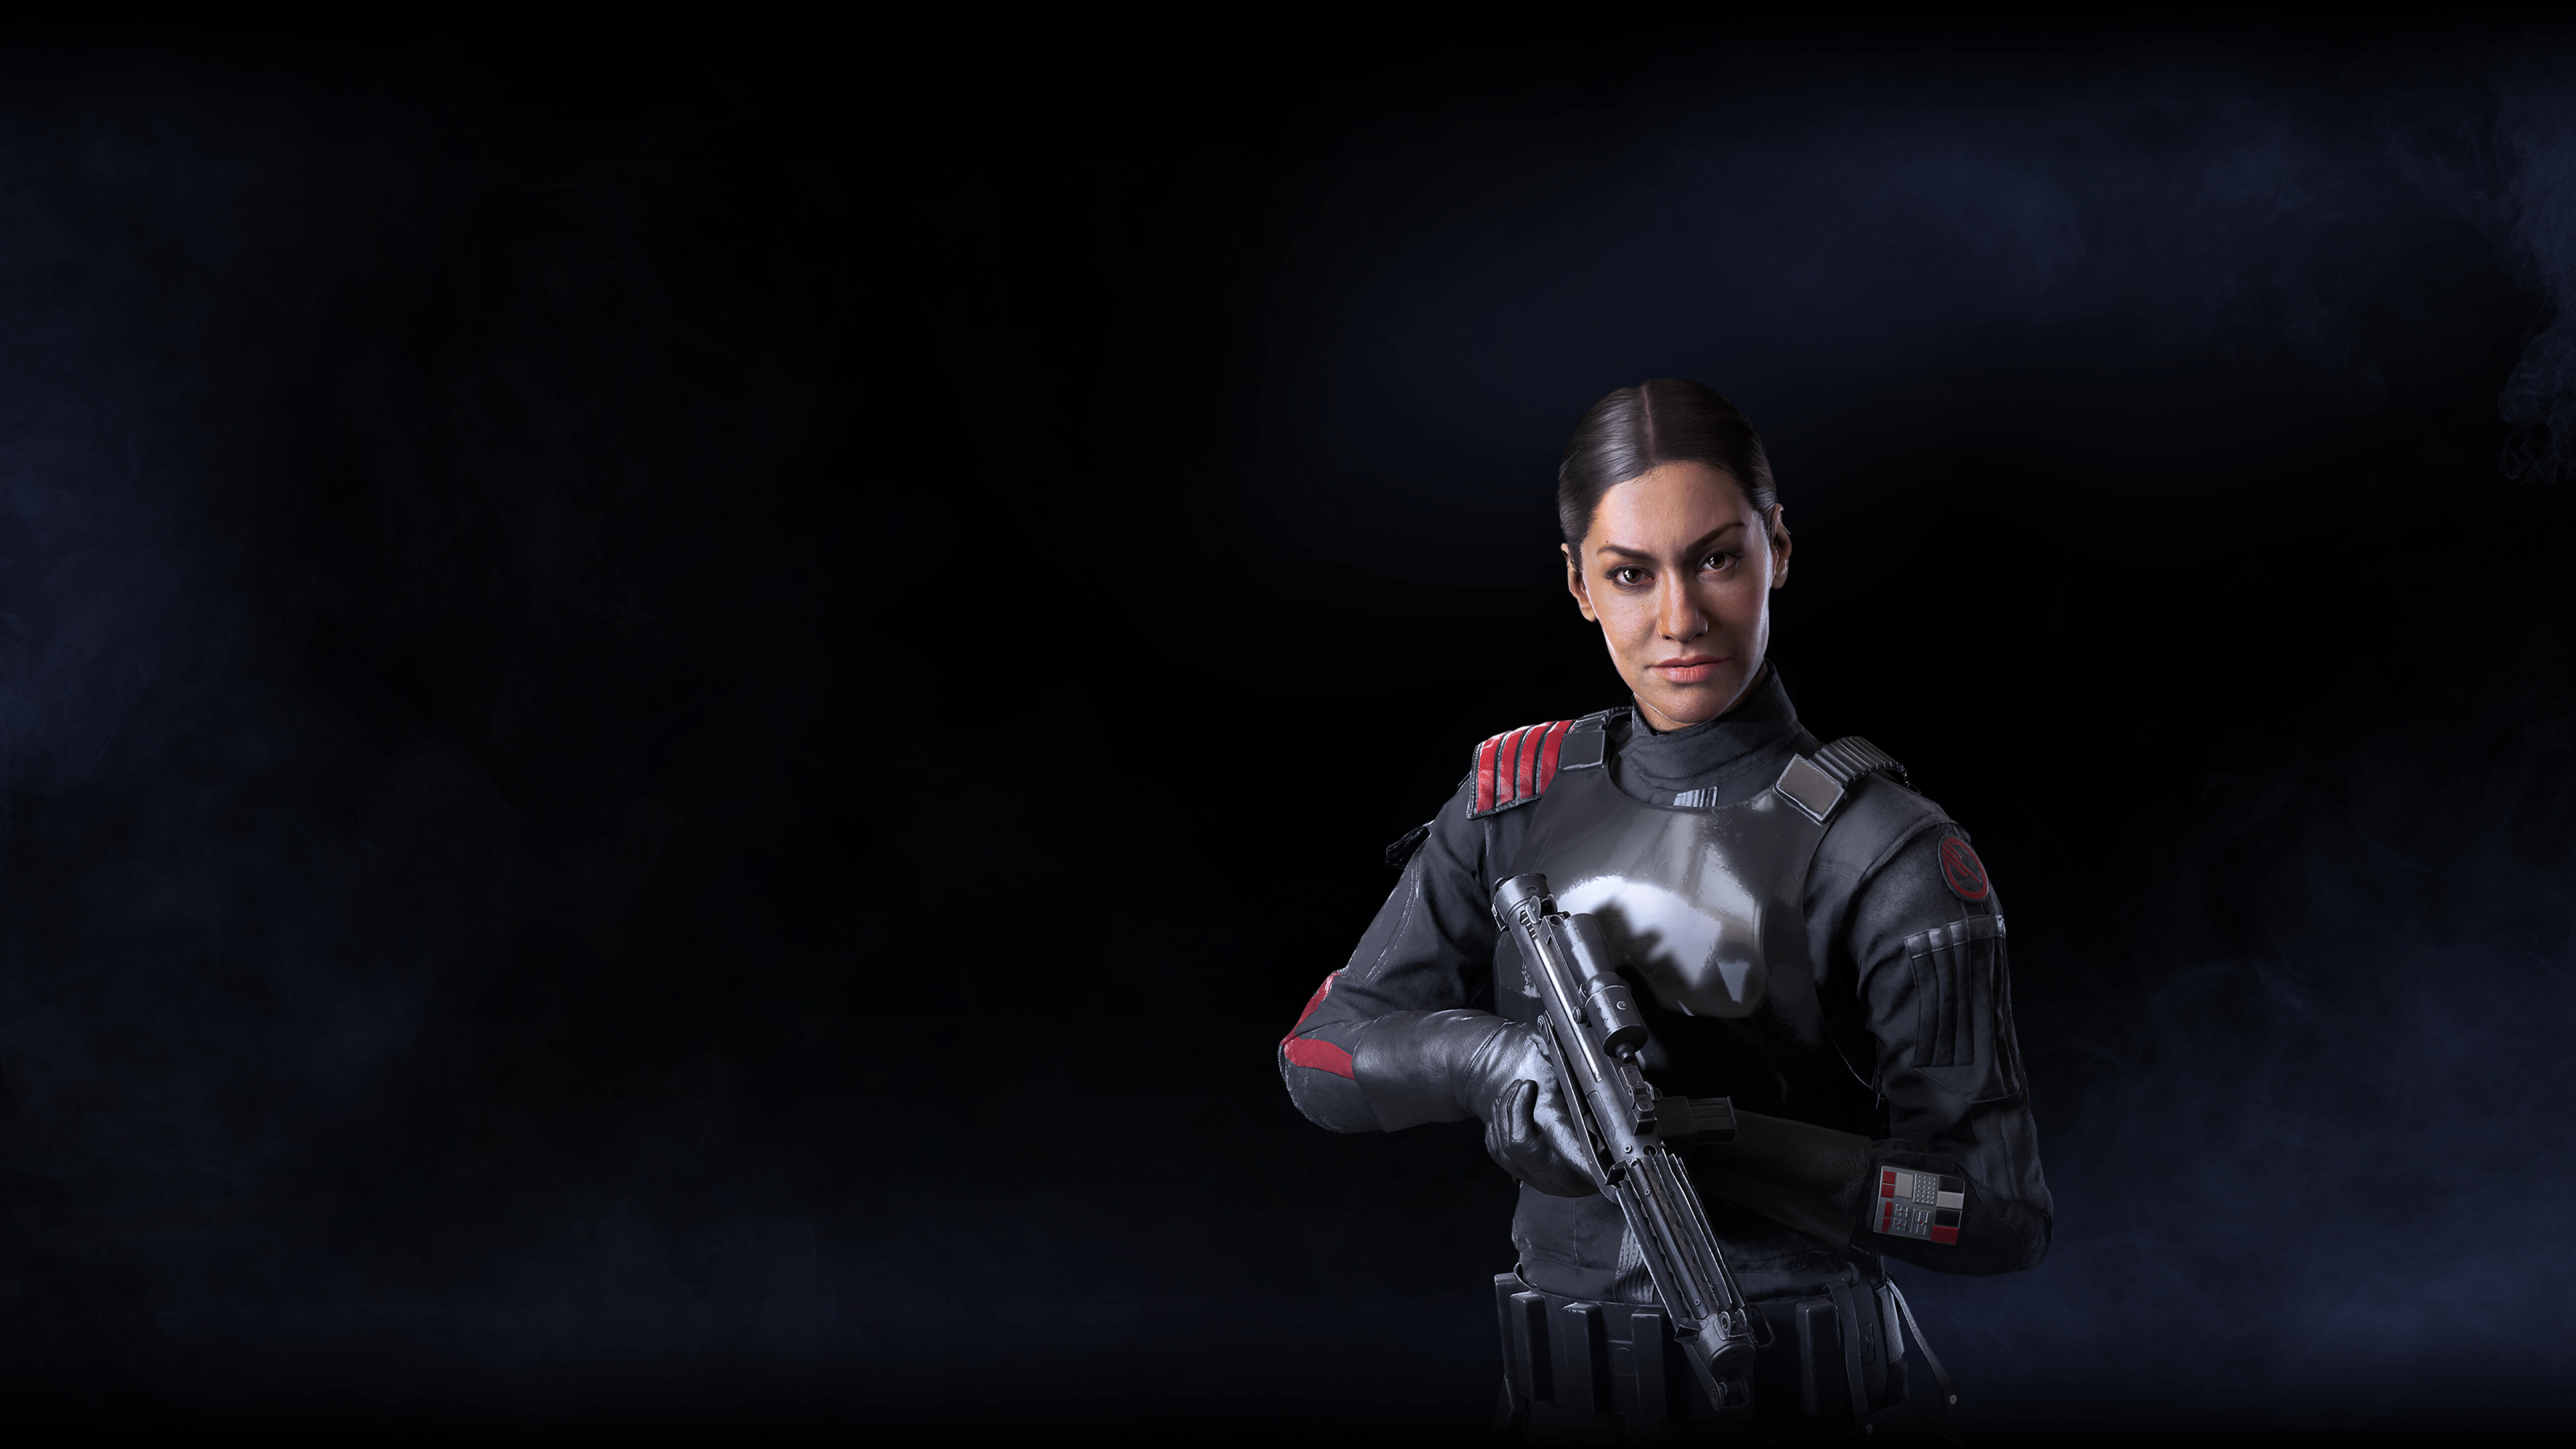 Free photo Girl from Star Wars Battlefront 2